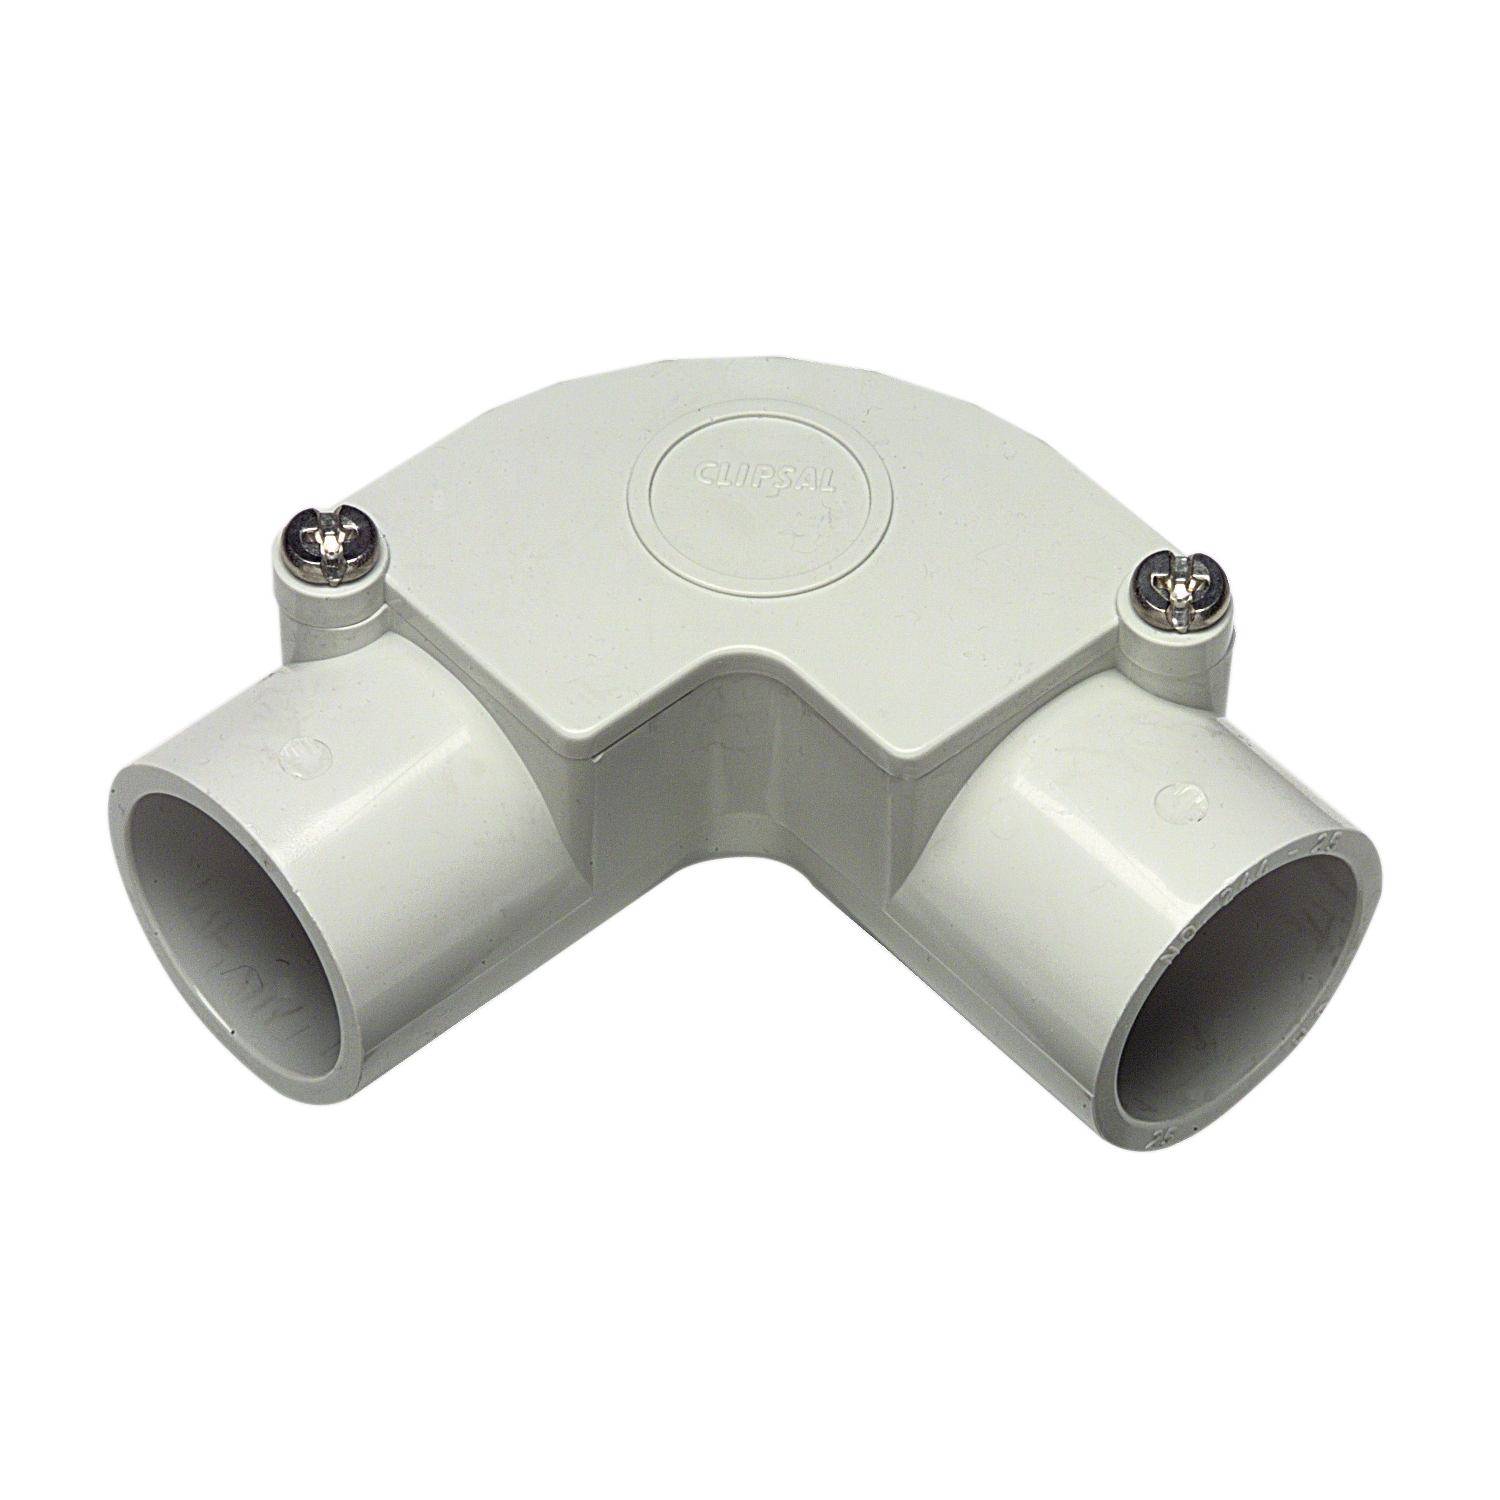 Inspection Fittings - PVC, Inspection Elbows, 25mm, Grey